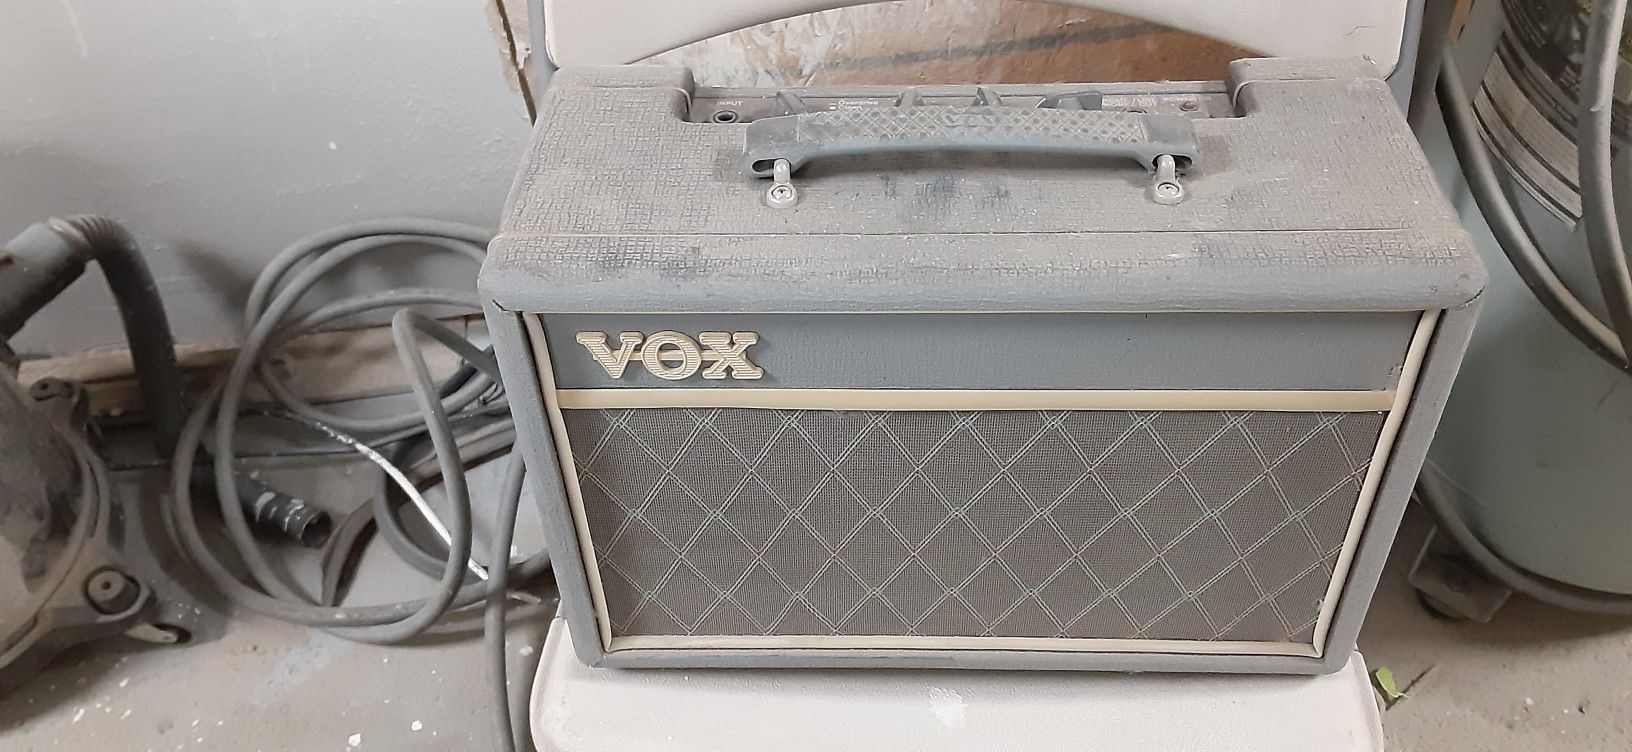 Vox Guitar Amplifier  Dusty But Works Great